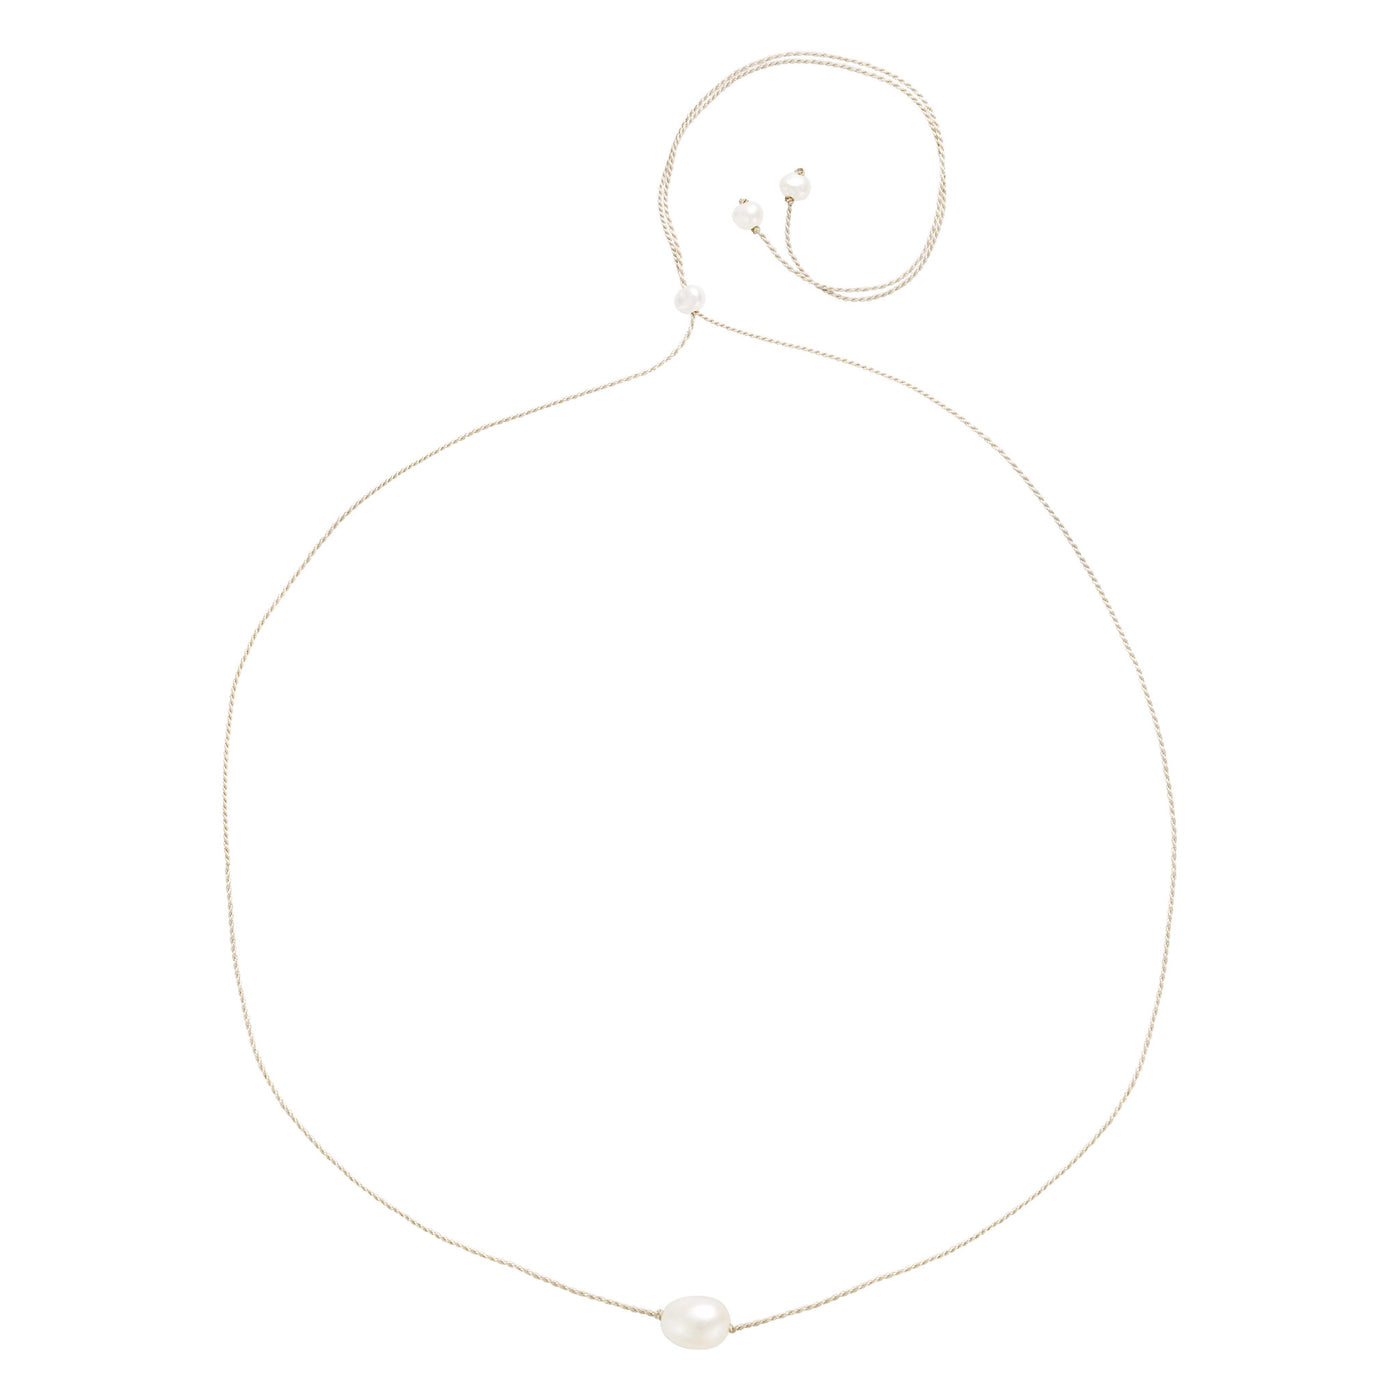 Floating Pearl Adjustable Necklace White